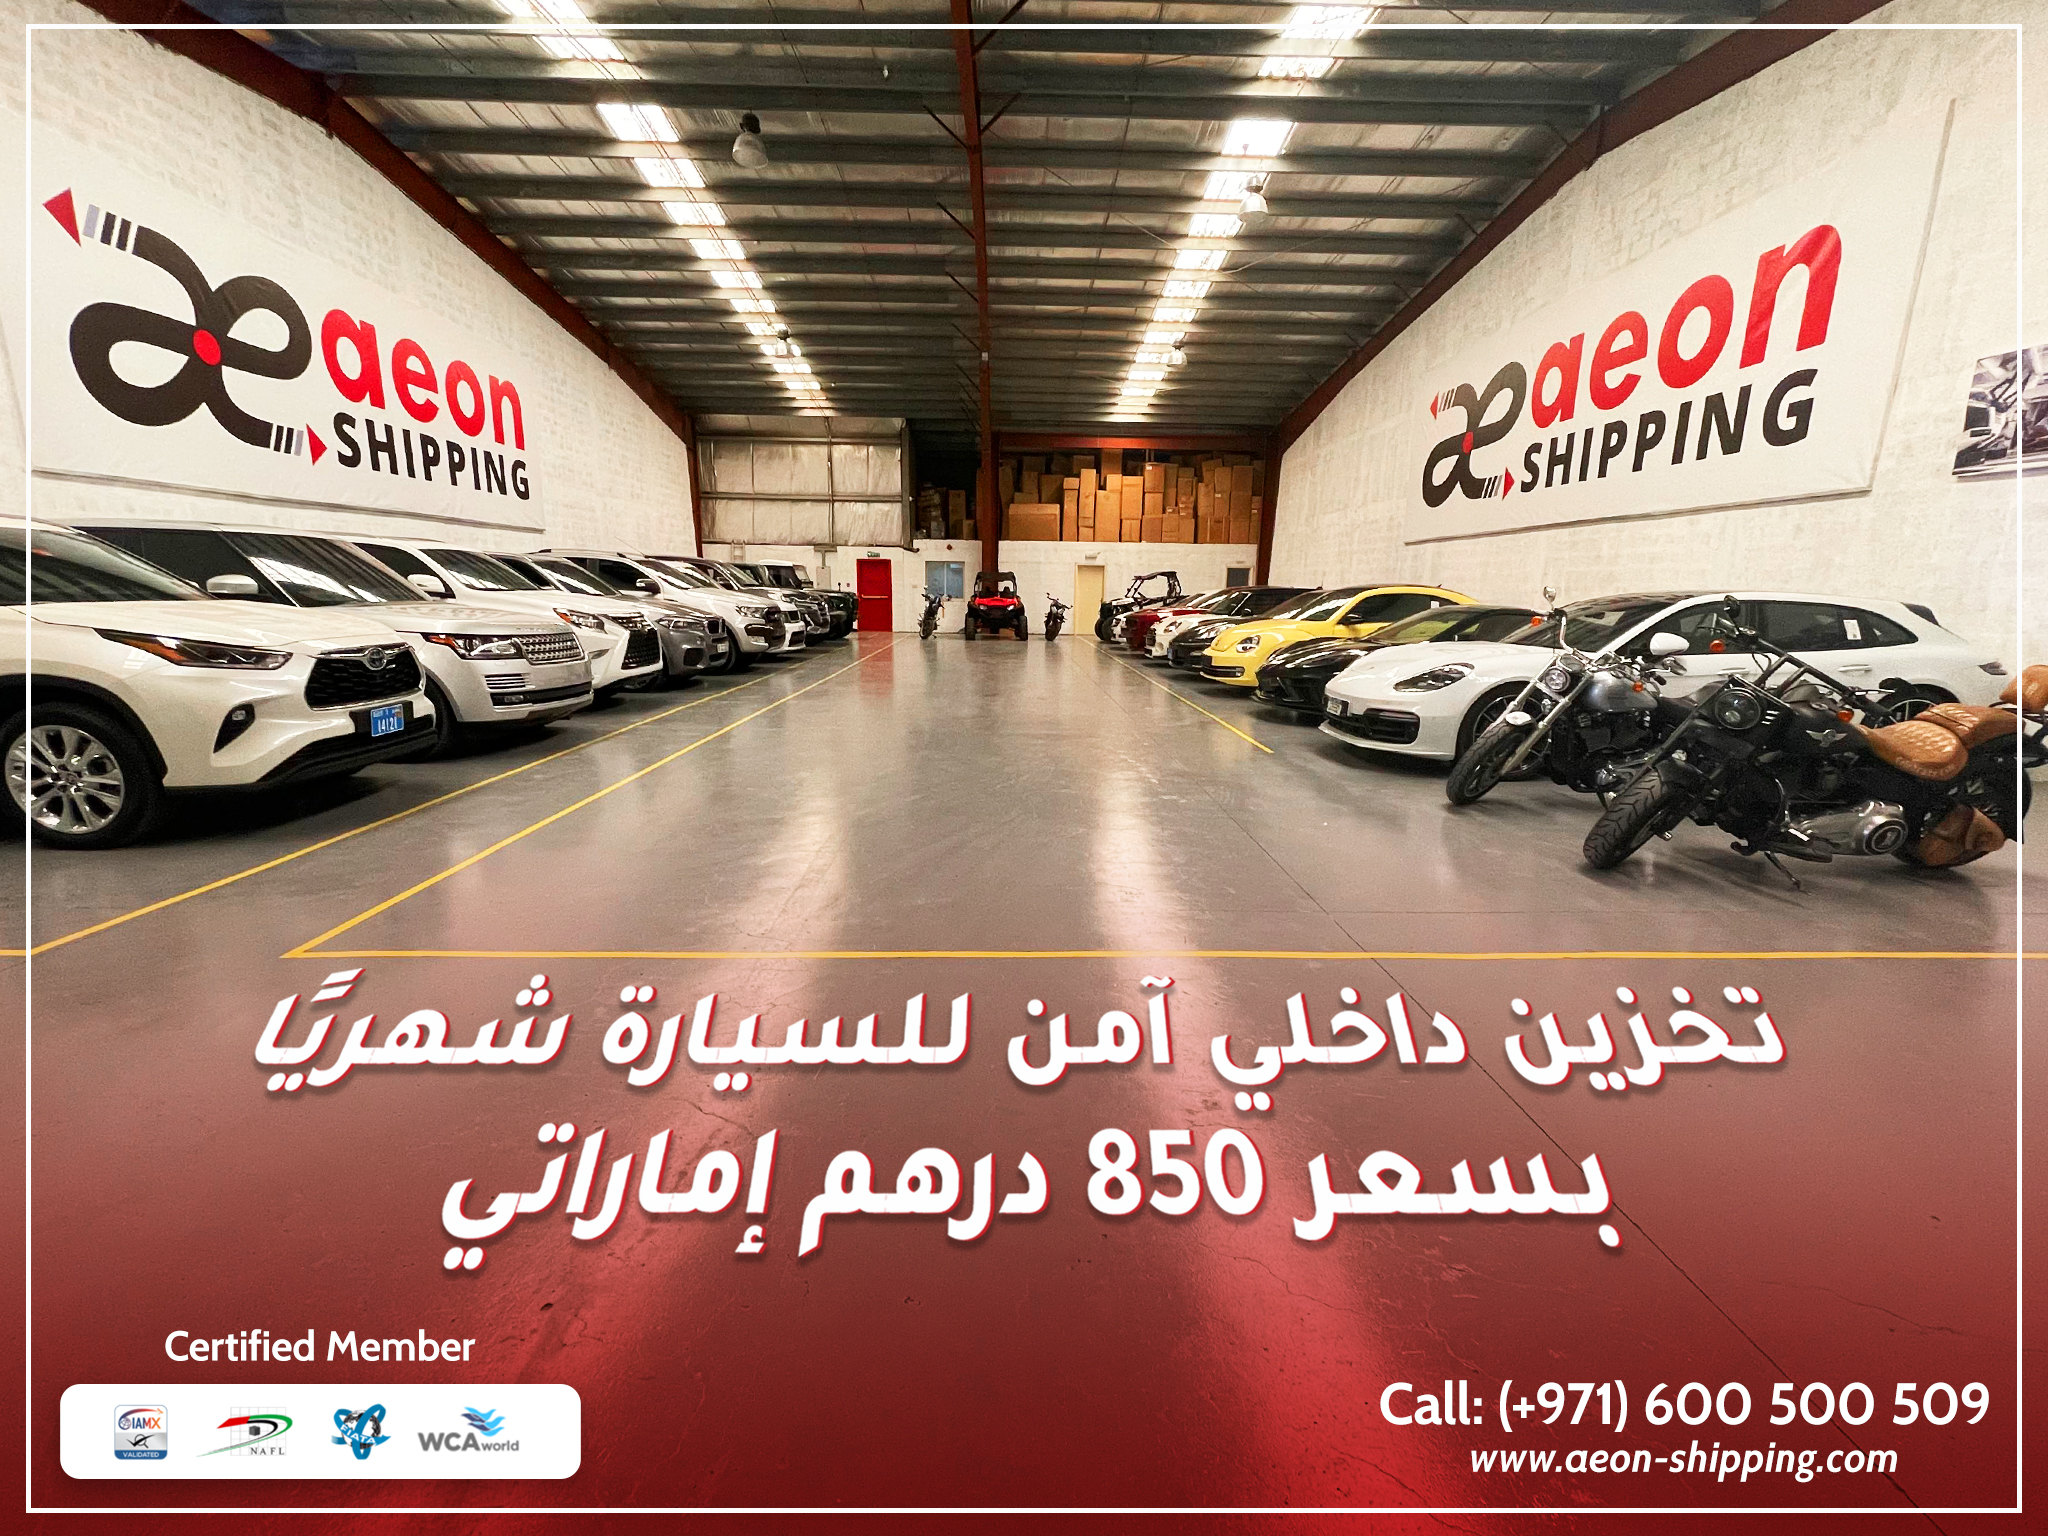 car storage service in Dubai for an affordable price